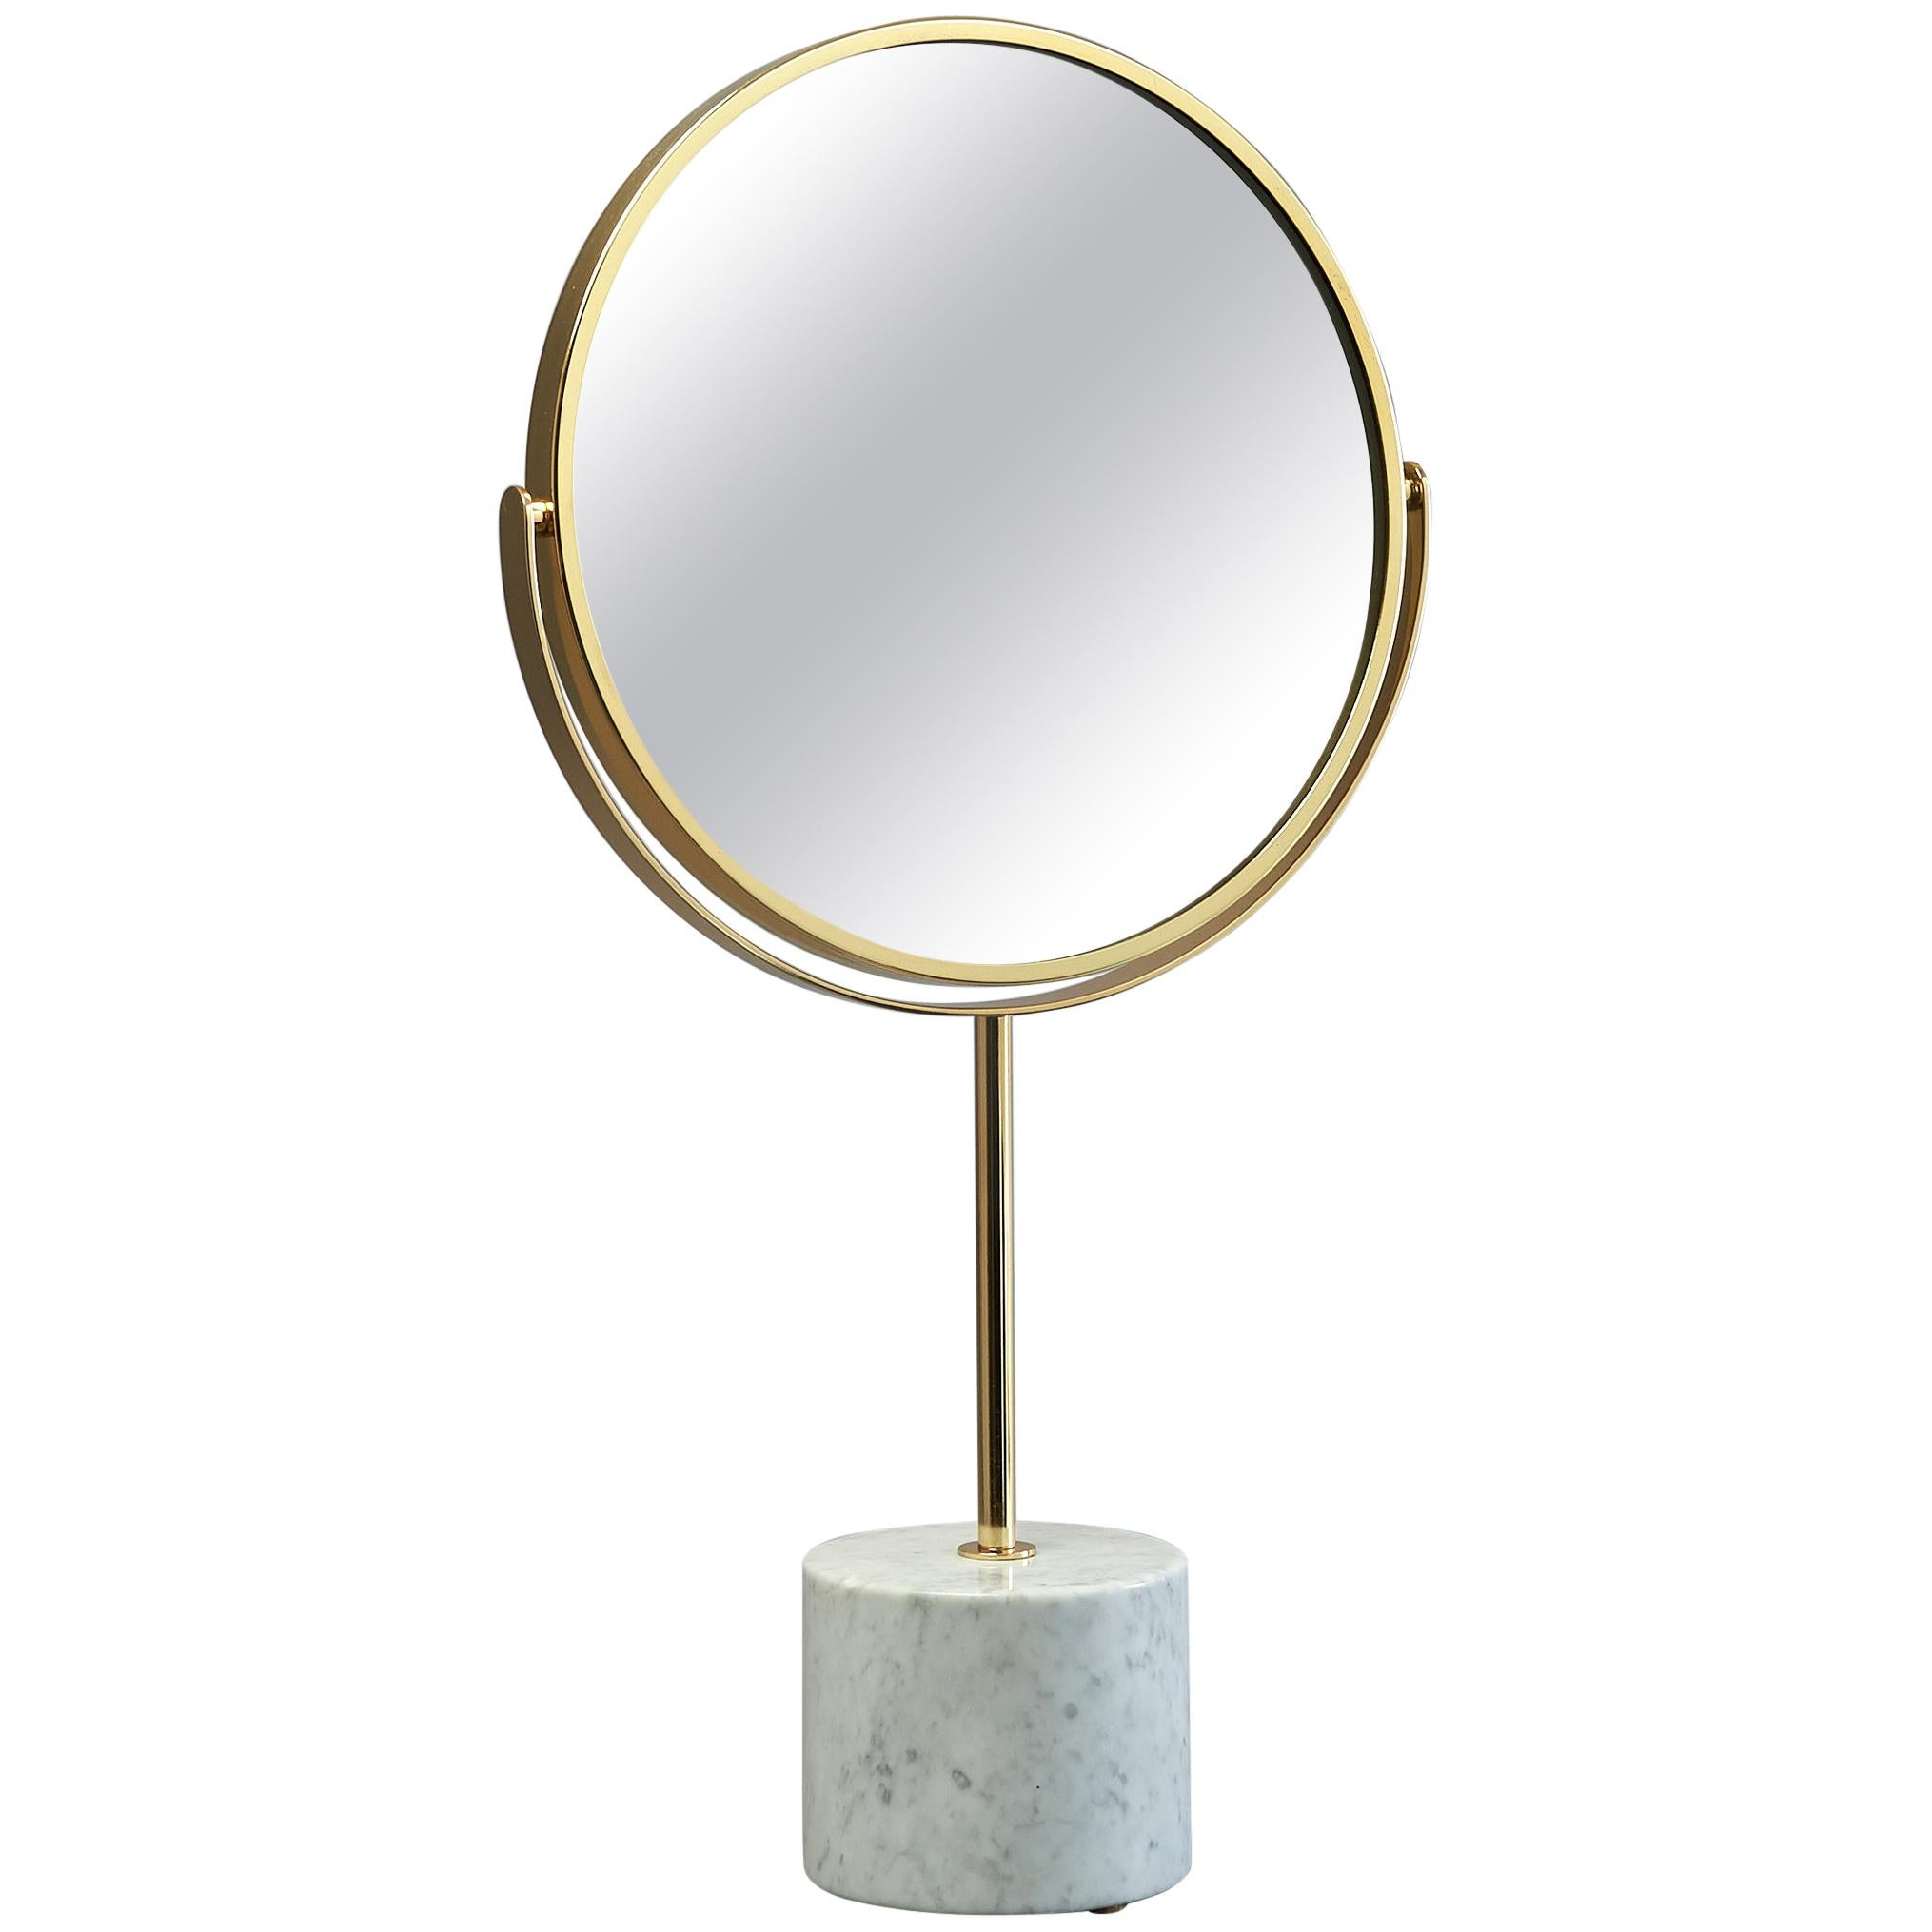 Modernist Adjustable Table Mirror, Italy, 1950's For Sale